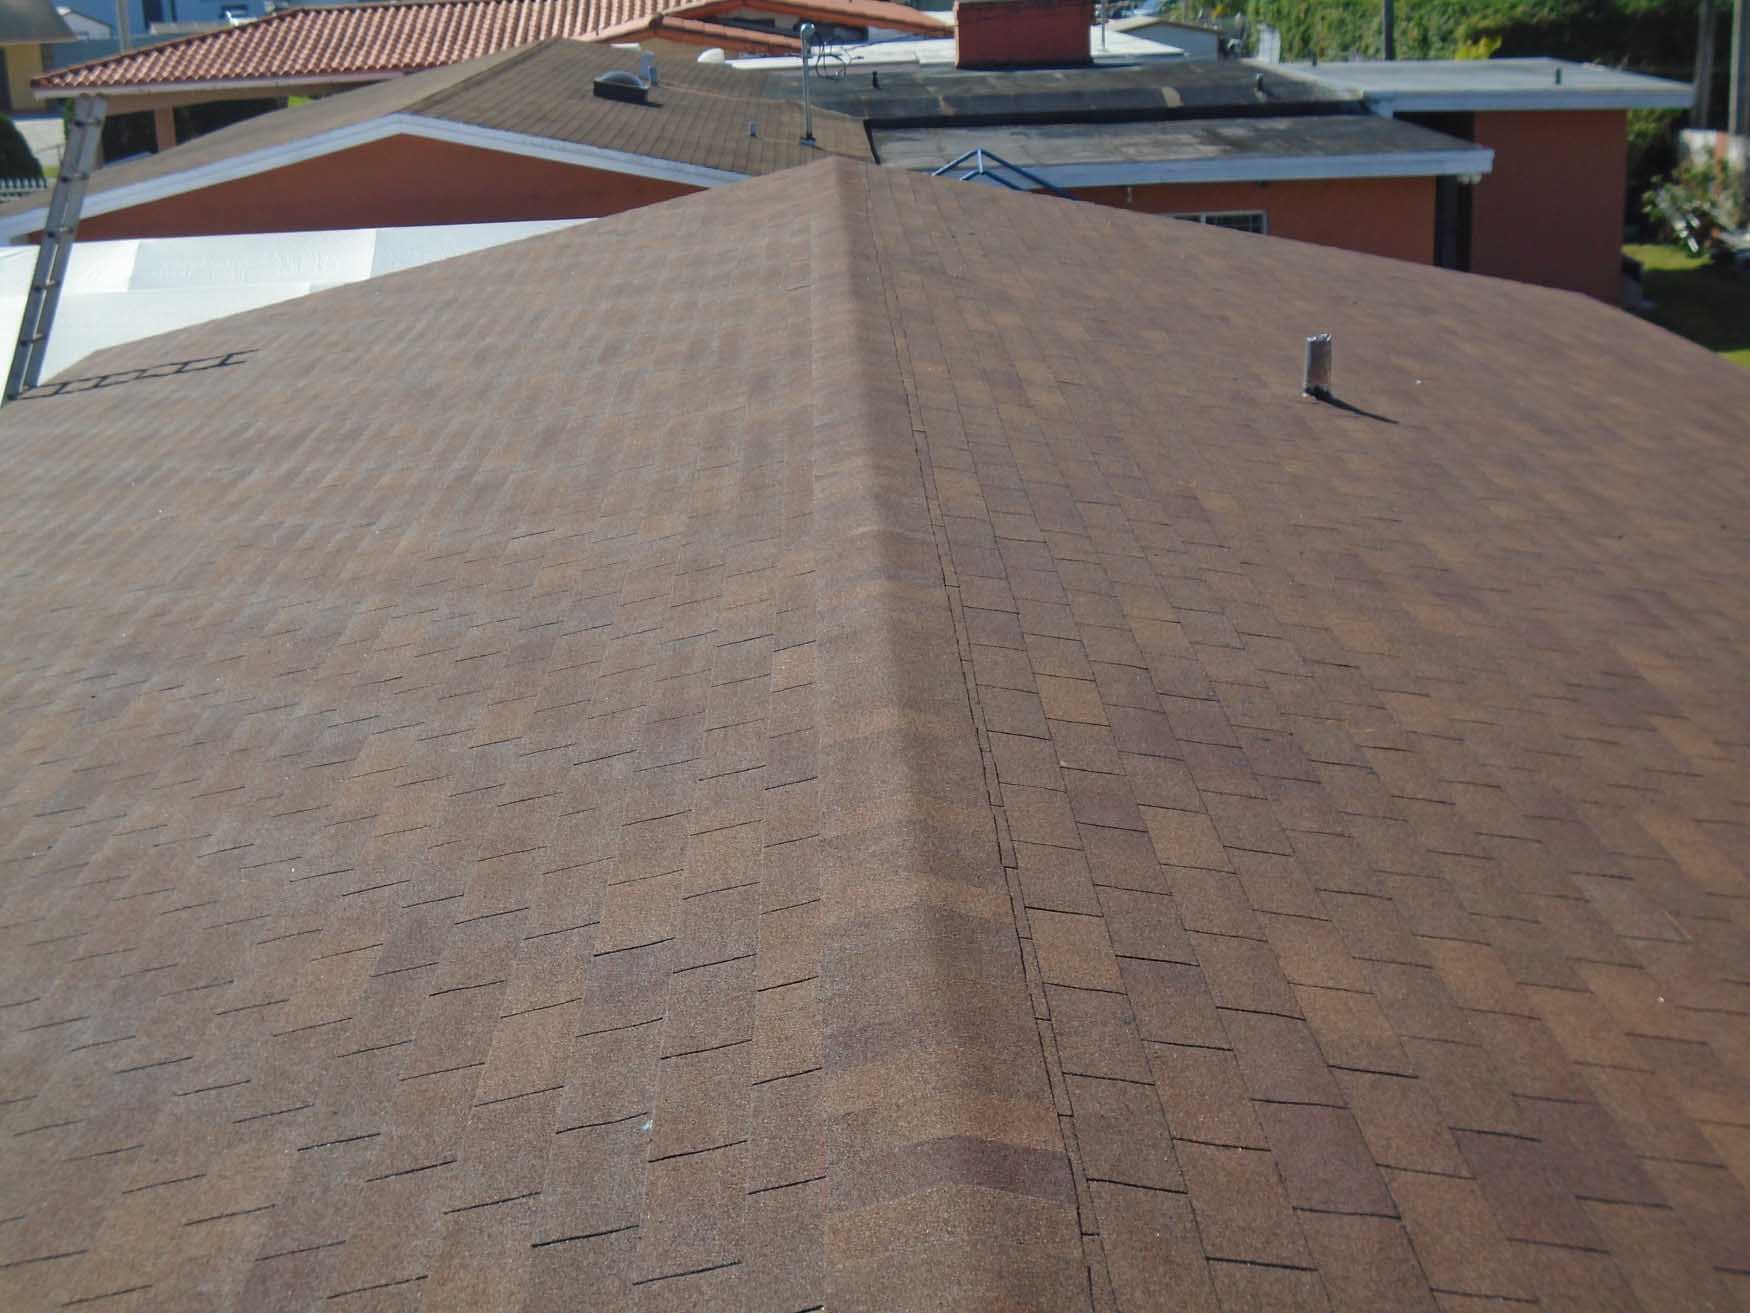 Installed 3-tab shingle on pitched roof